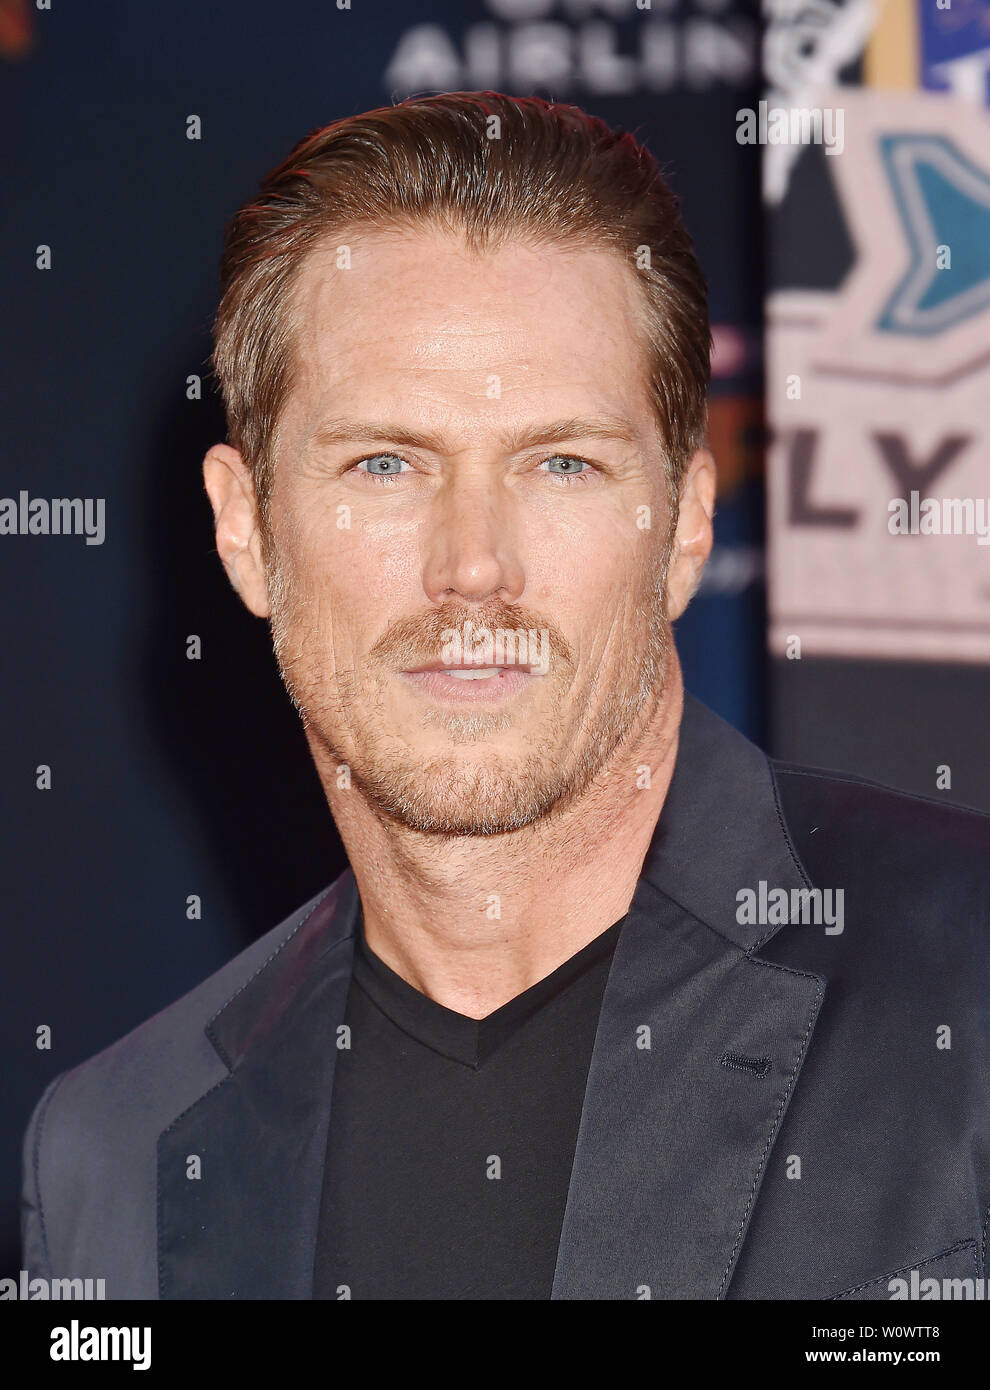 HOLLYWOOD, CA - JUNE 26: Jason Lewis attends the premiere of Sony Pictures' 'Spider-Man Far From Home' at TCL Chinese Theatre on June 26, 2019 in Hollywood, California. Stock Photo